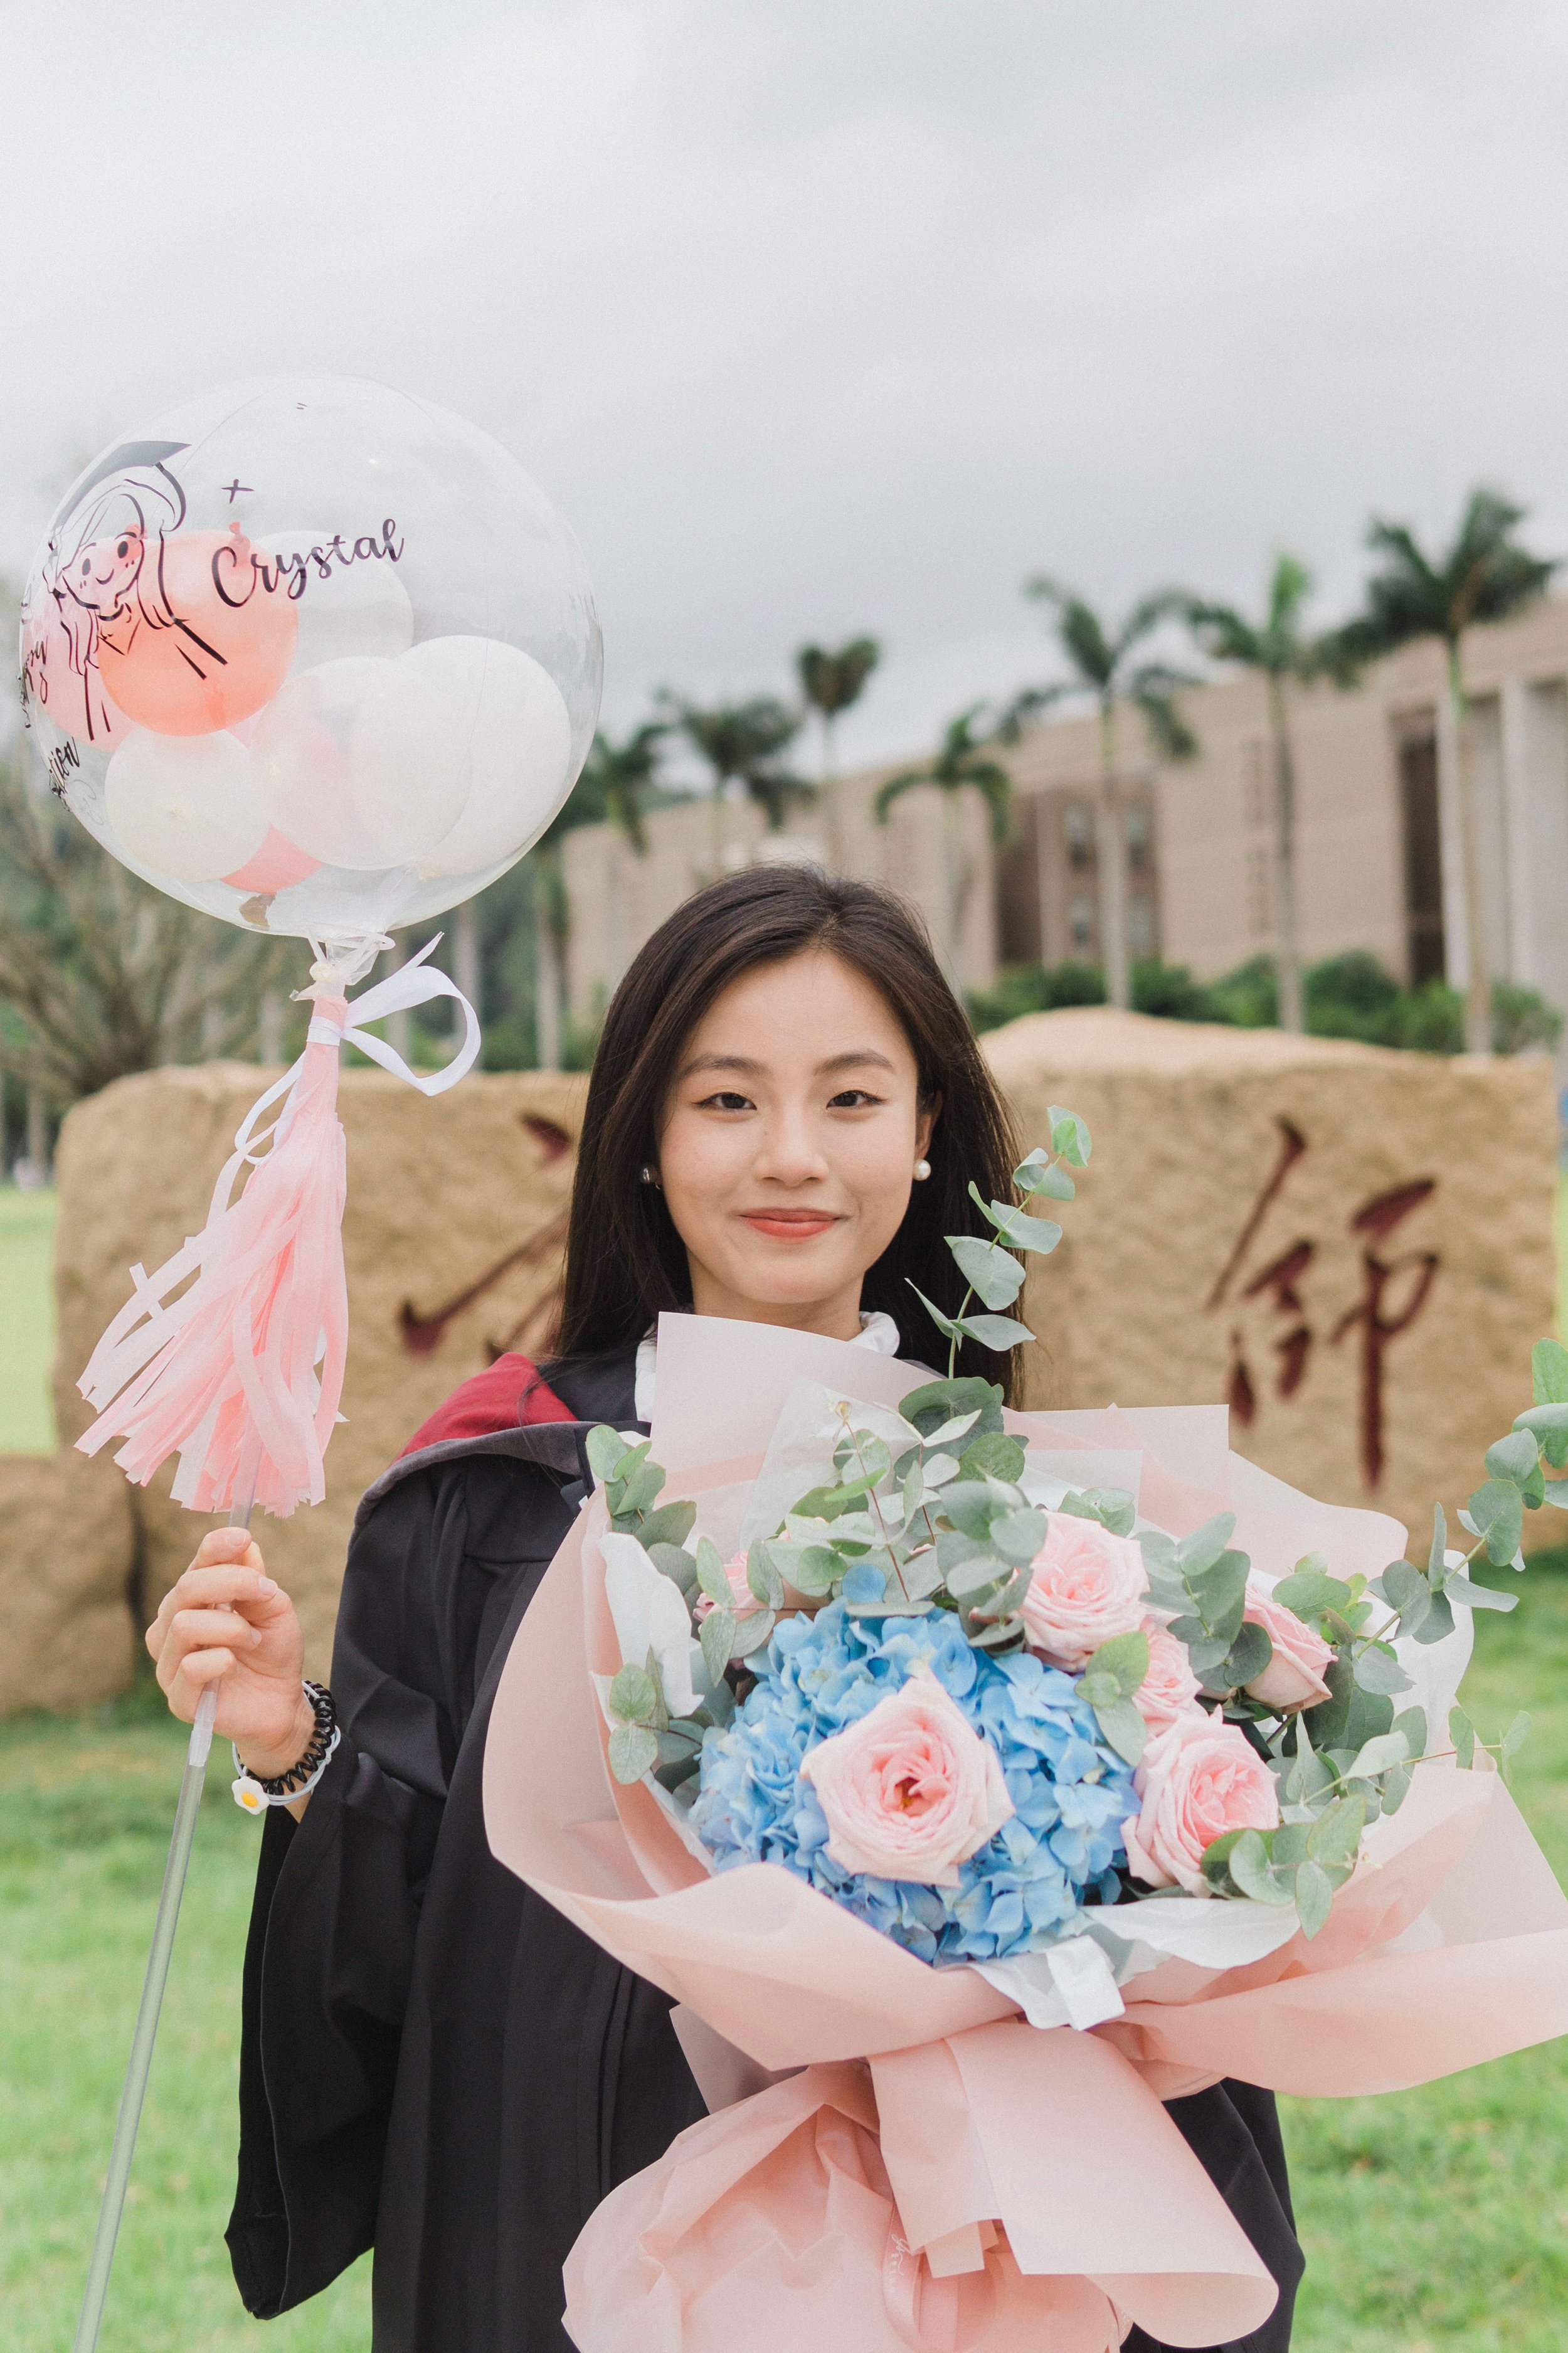  Zheng Jingjing graduated  summa cum laude  with a BComm (major in Finance) from SMU and a Bachelor of Economics from BNUZ.  